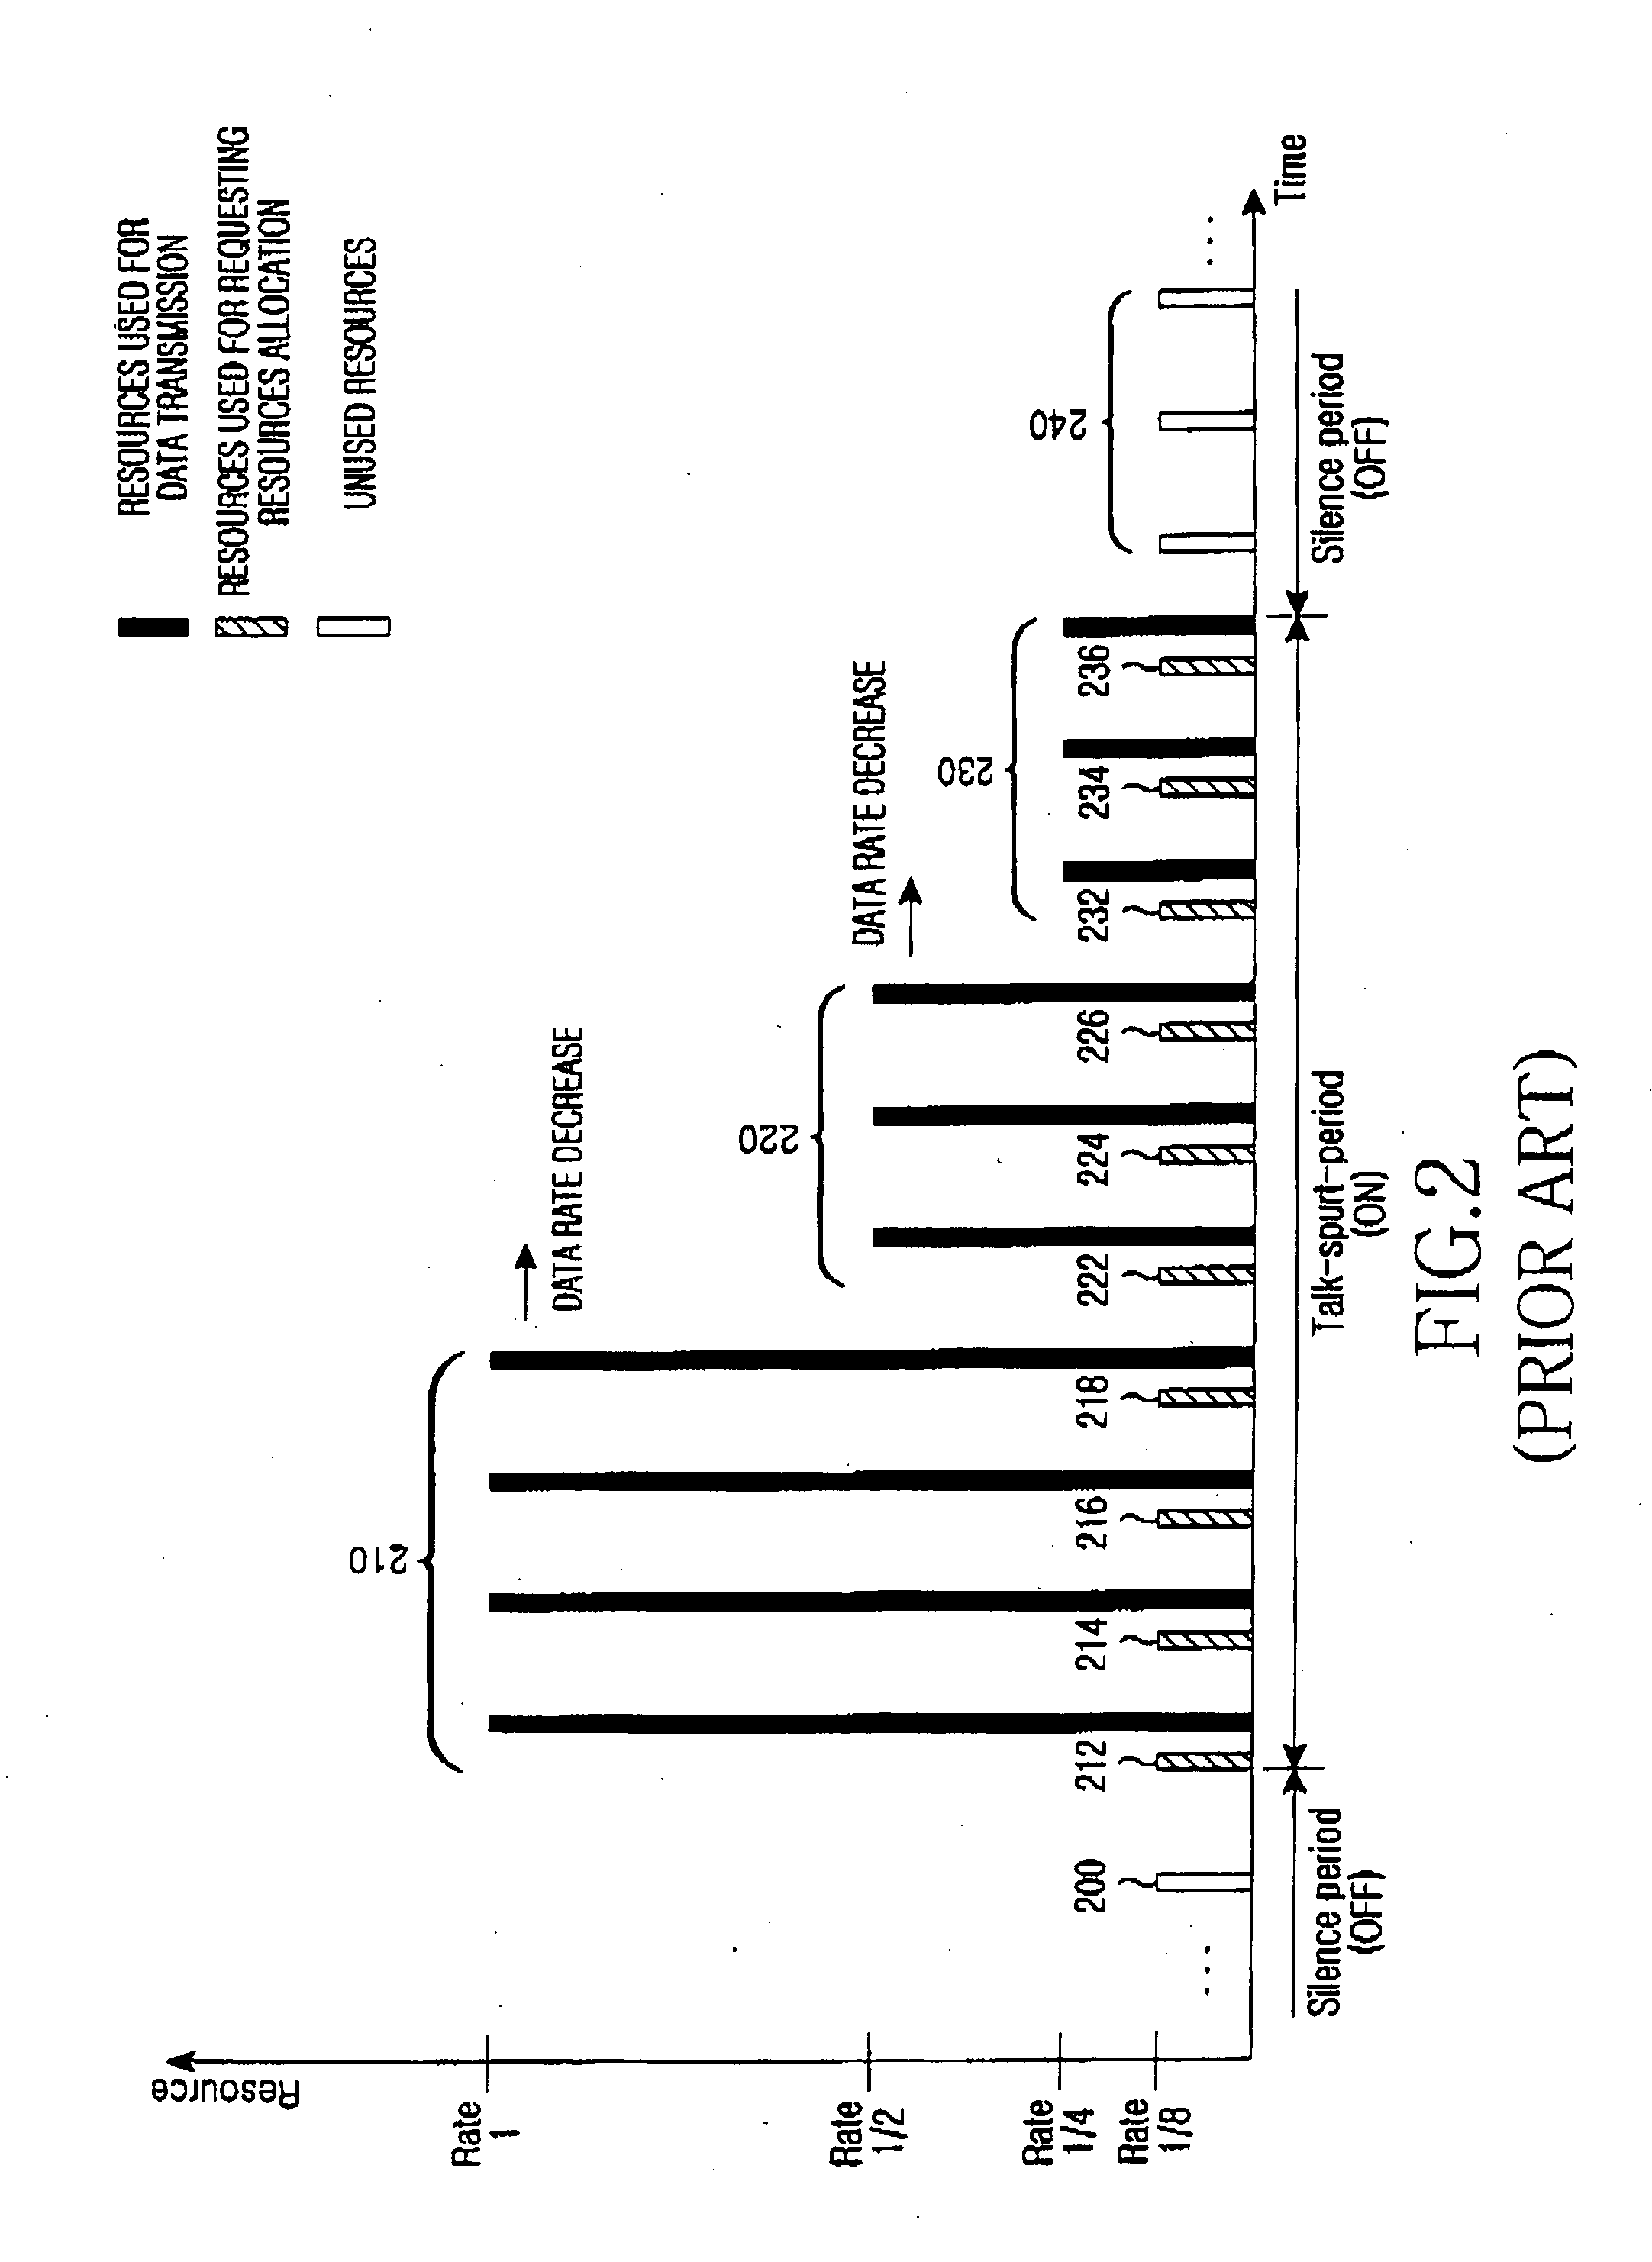 Method of requesting allocation of uplink resources for extended real-time polling service in a wireless communication system